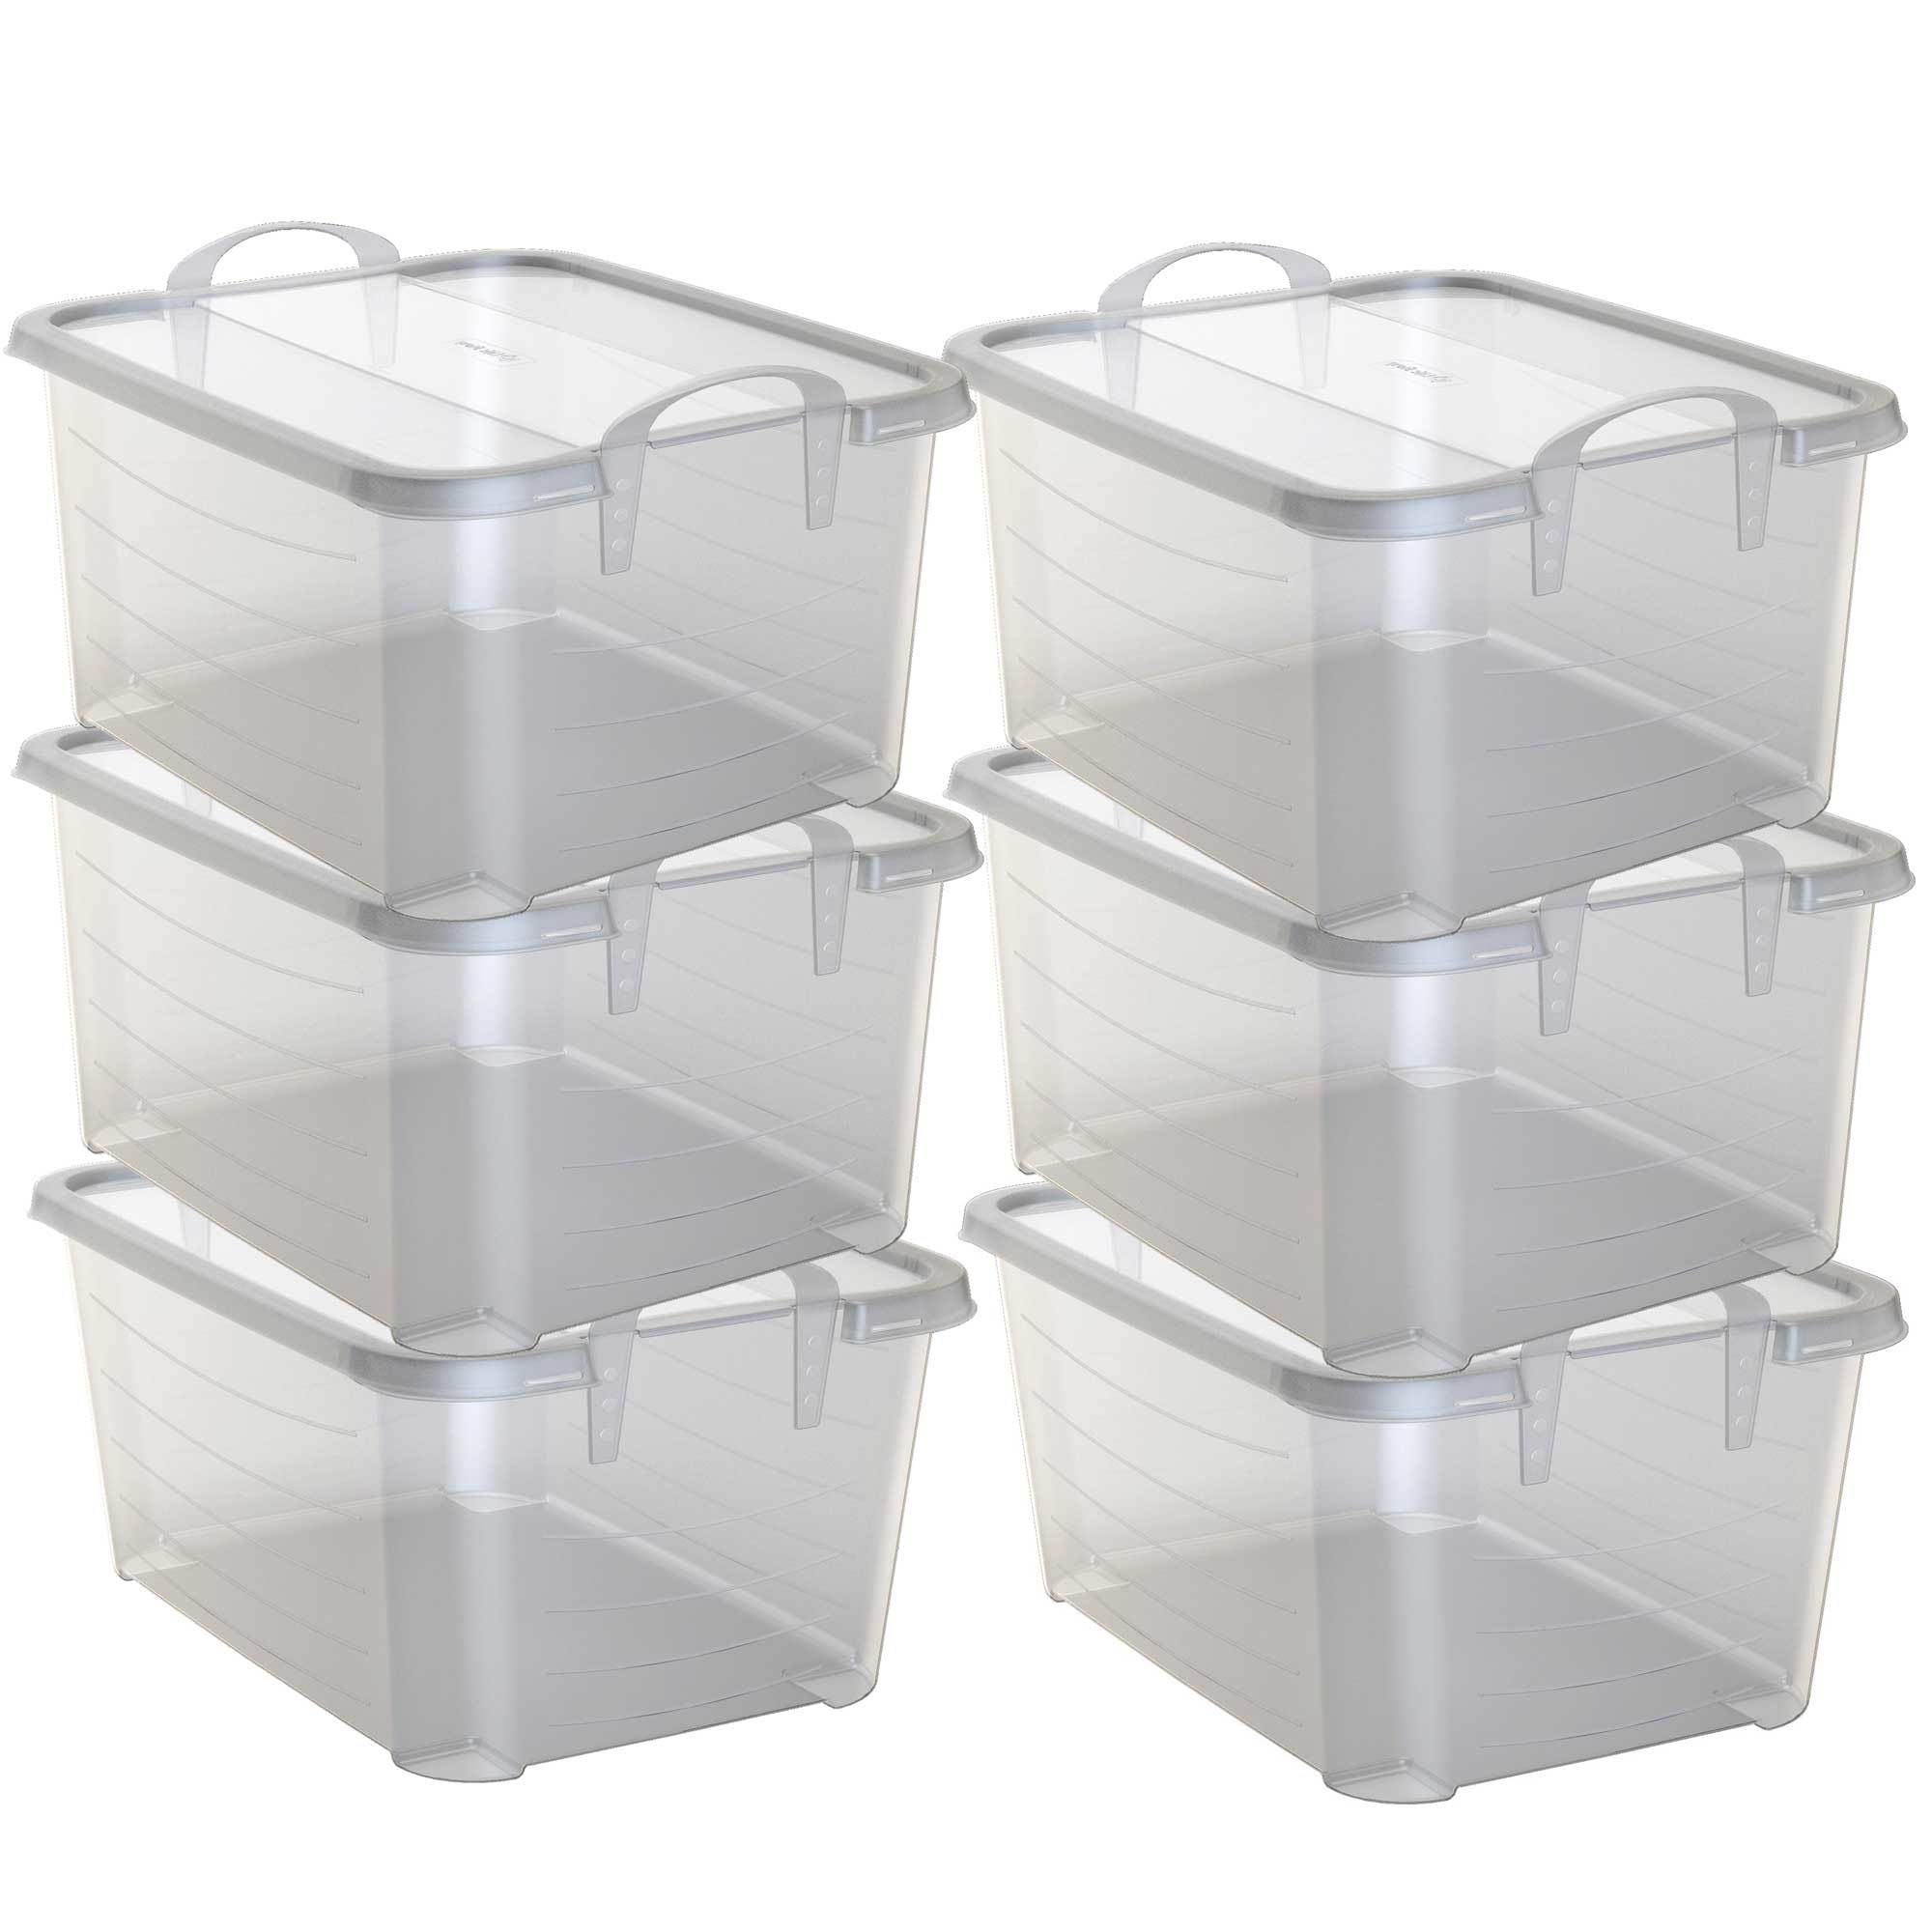 Kitchen Stackable Collapsible Storage Bin Car Office Clothes Organizer Storage Box with Lid Large Capacity Storage Container for Home Clear Plastic Storage Bin